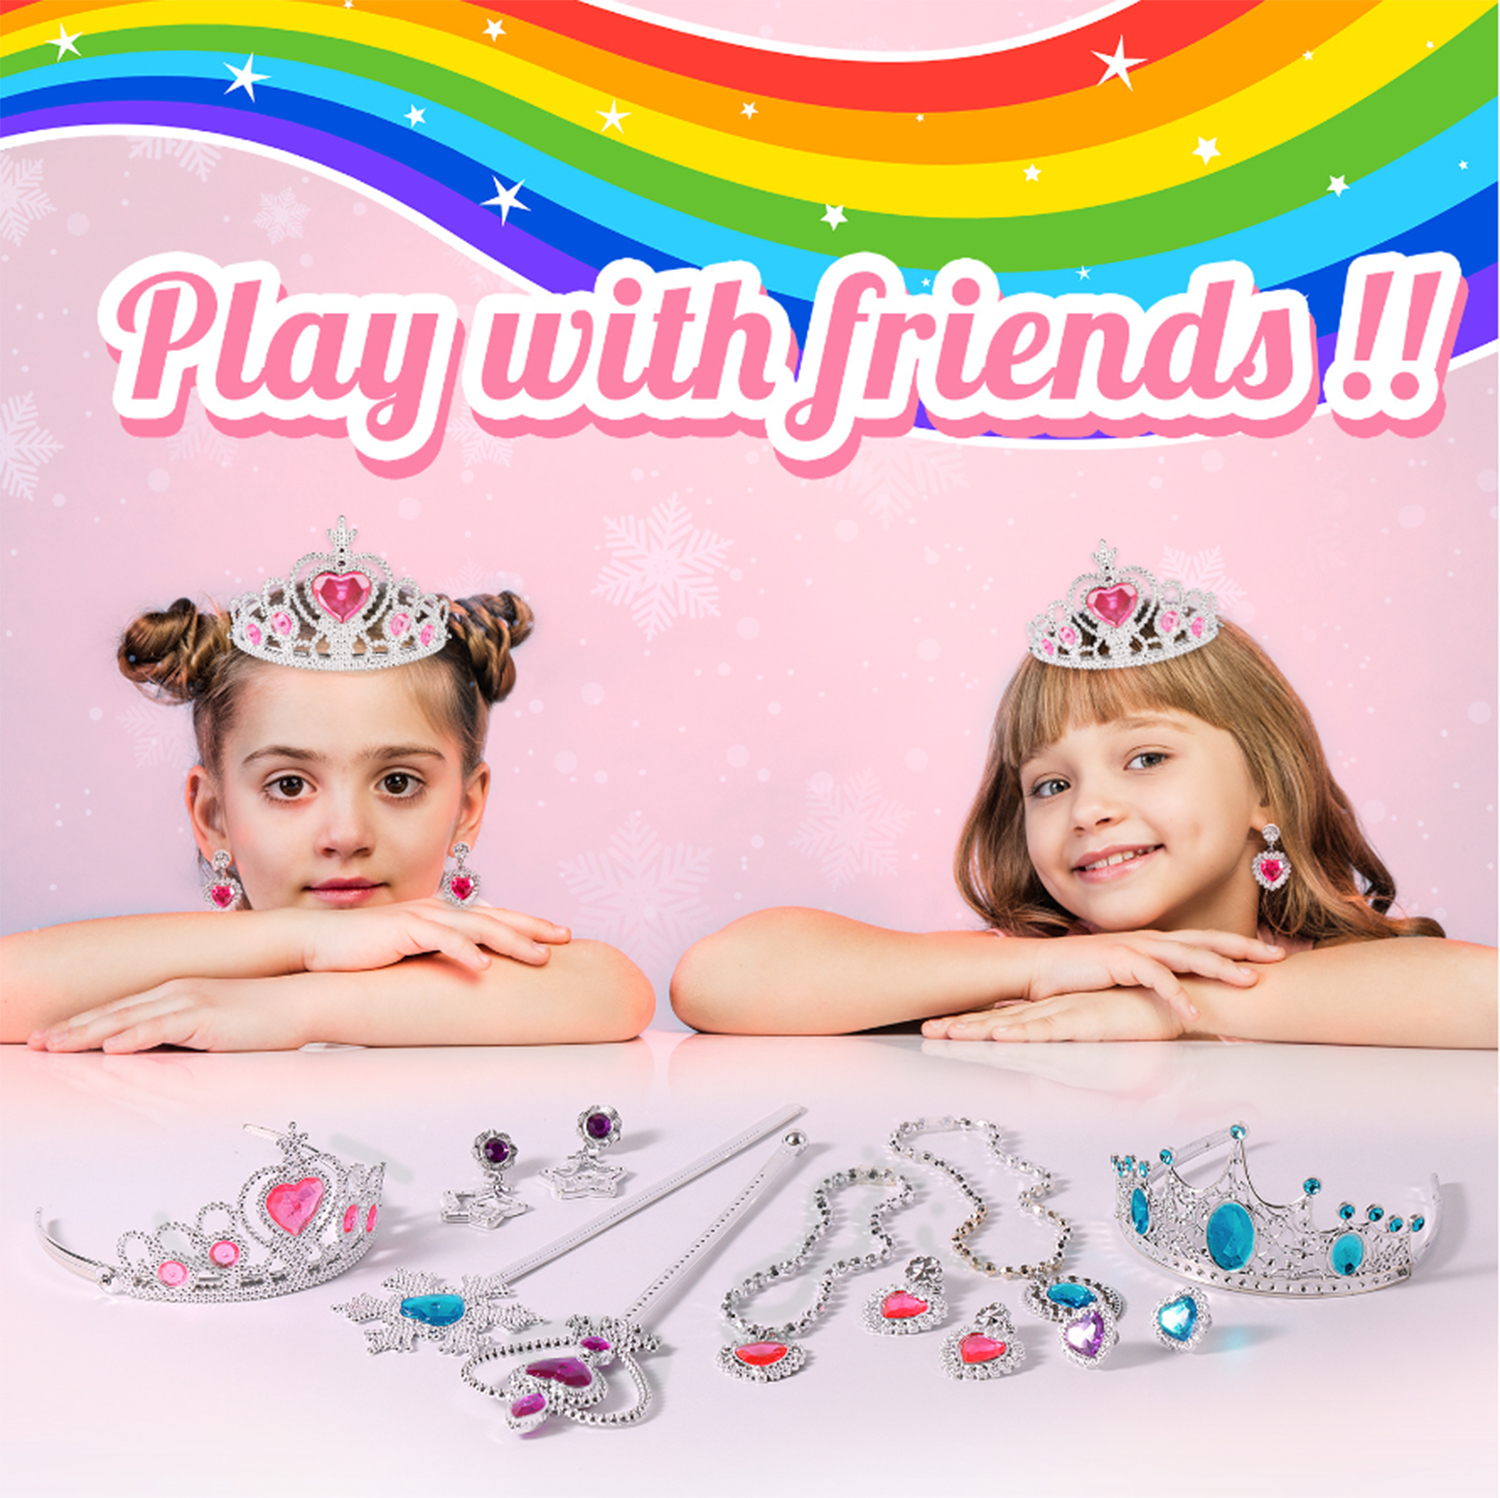 AOXTOY Dress-up Cosplay Toys for Girls, Princess Dress Up Clothes Cape Skirt Set, Pretend Play Princess Dress Cloak Jewelry Crown Wand - image 2 of 11